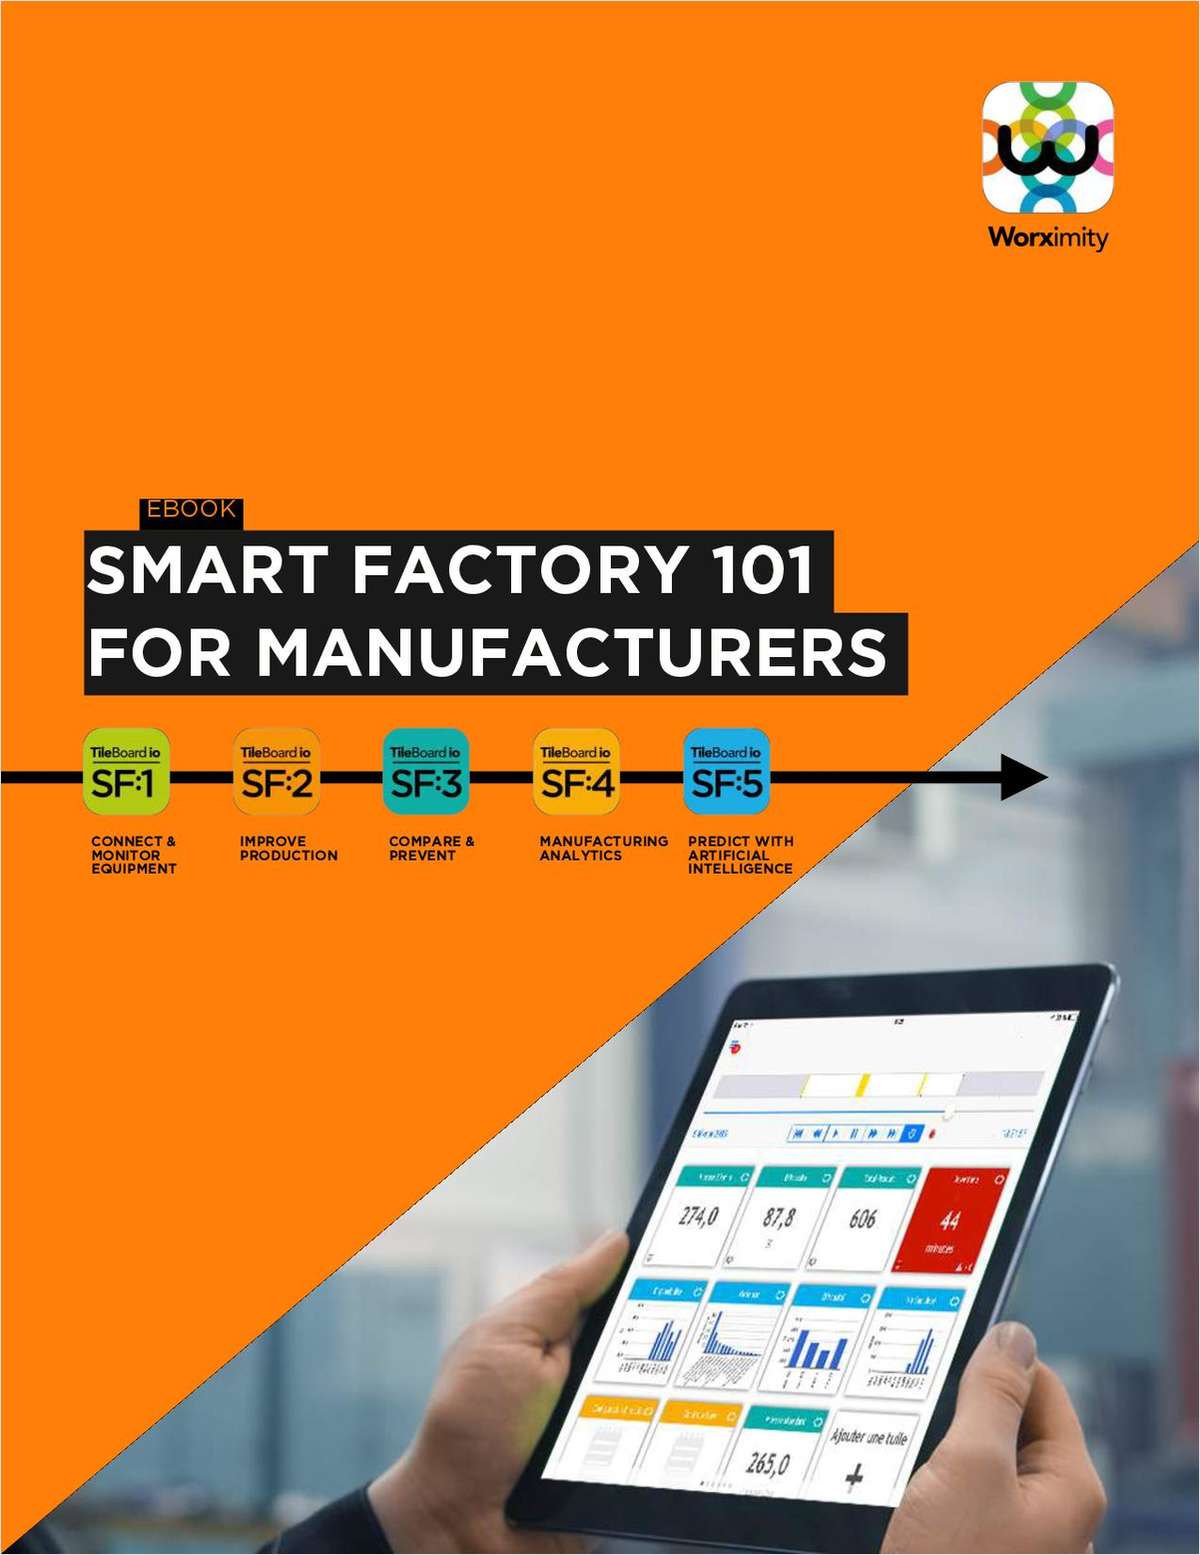 See how Meat and Poultry Manufacturers are gaining ground with the Smart Factory 101 Ebook for Food Companies.